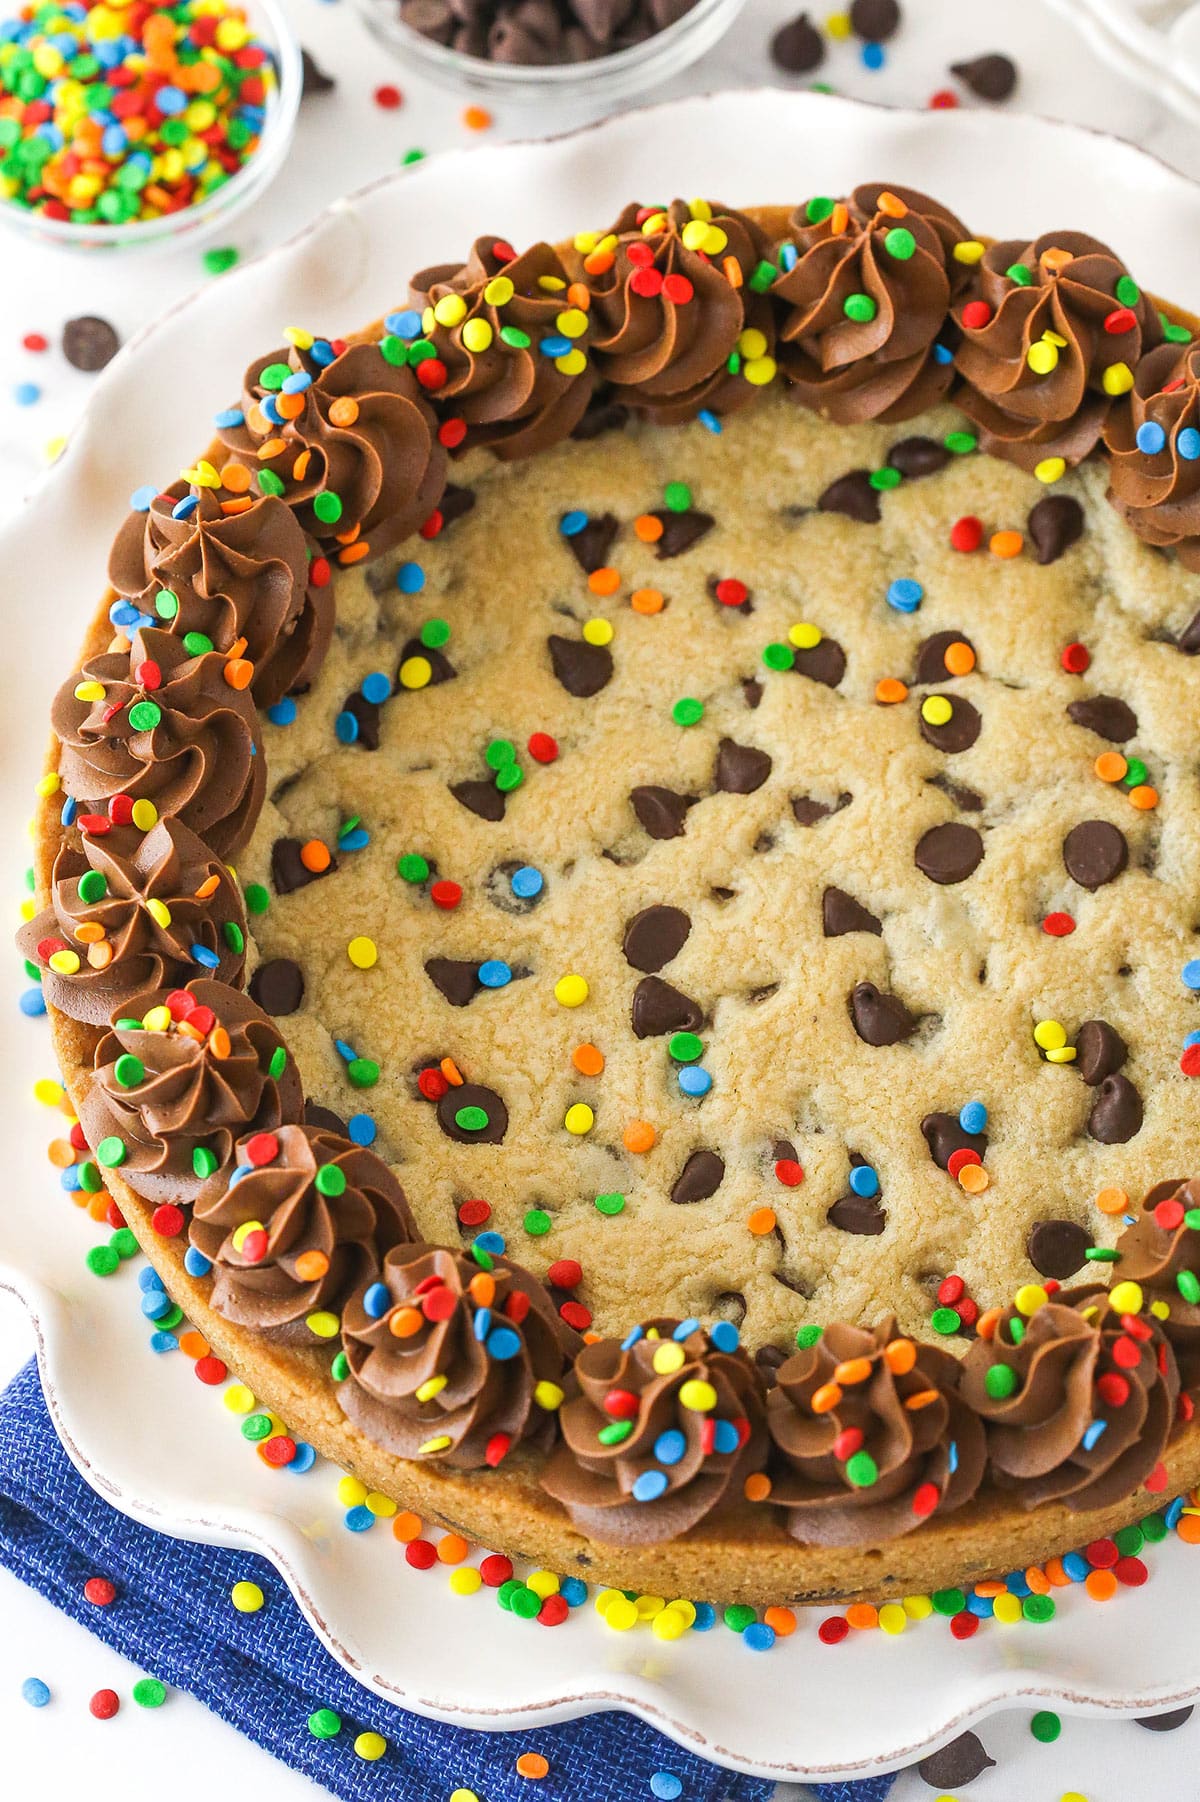 Chocolate Chip Cookie Cake with multicolored sprinkles on a serving platter.